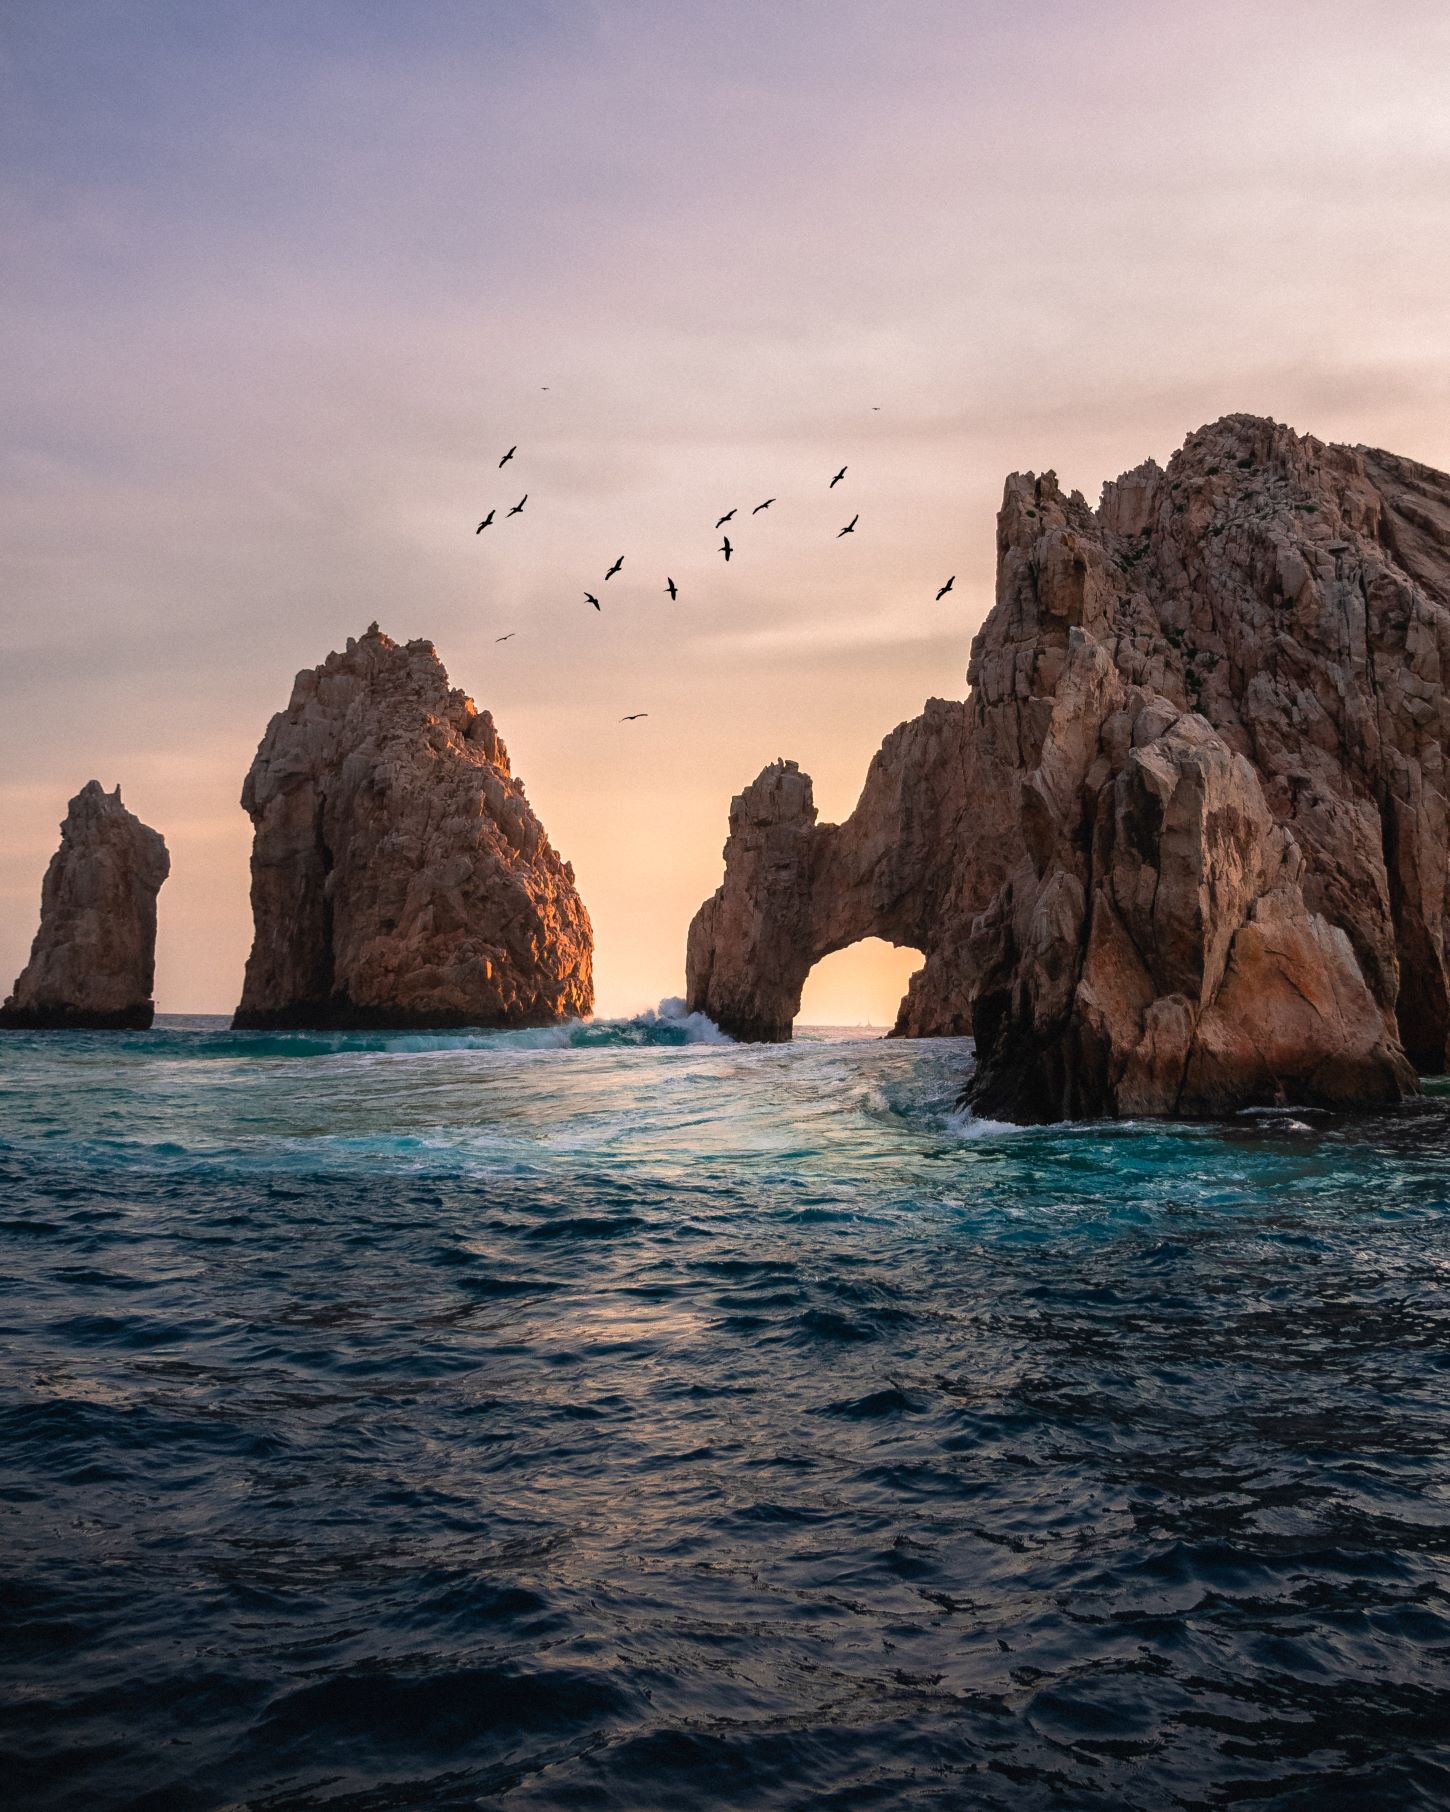 An image of the famous arc in Cabo San Lucas.